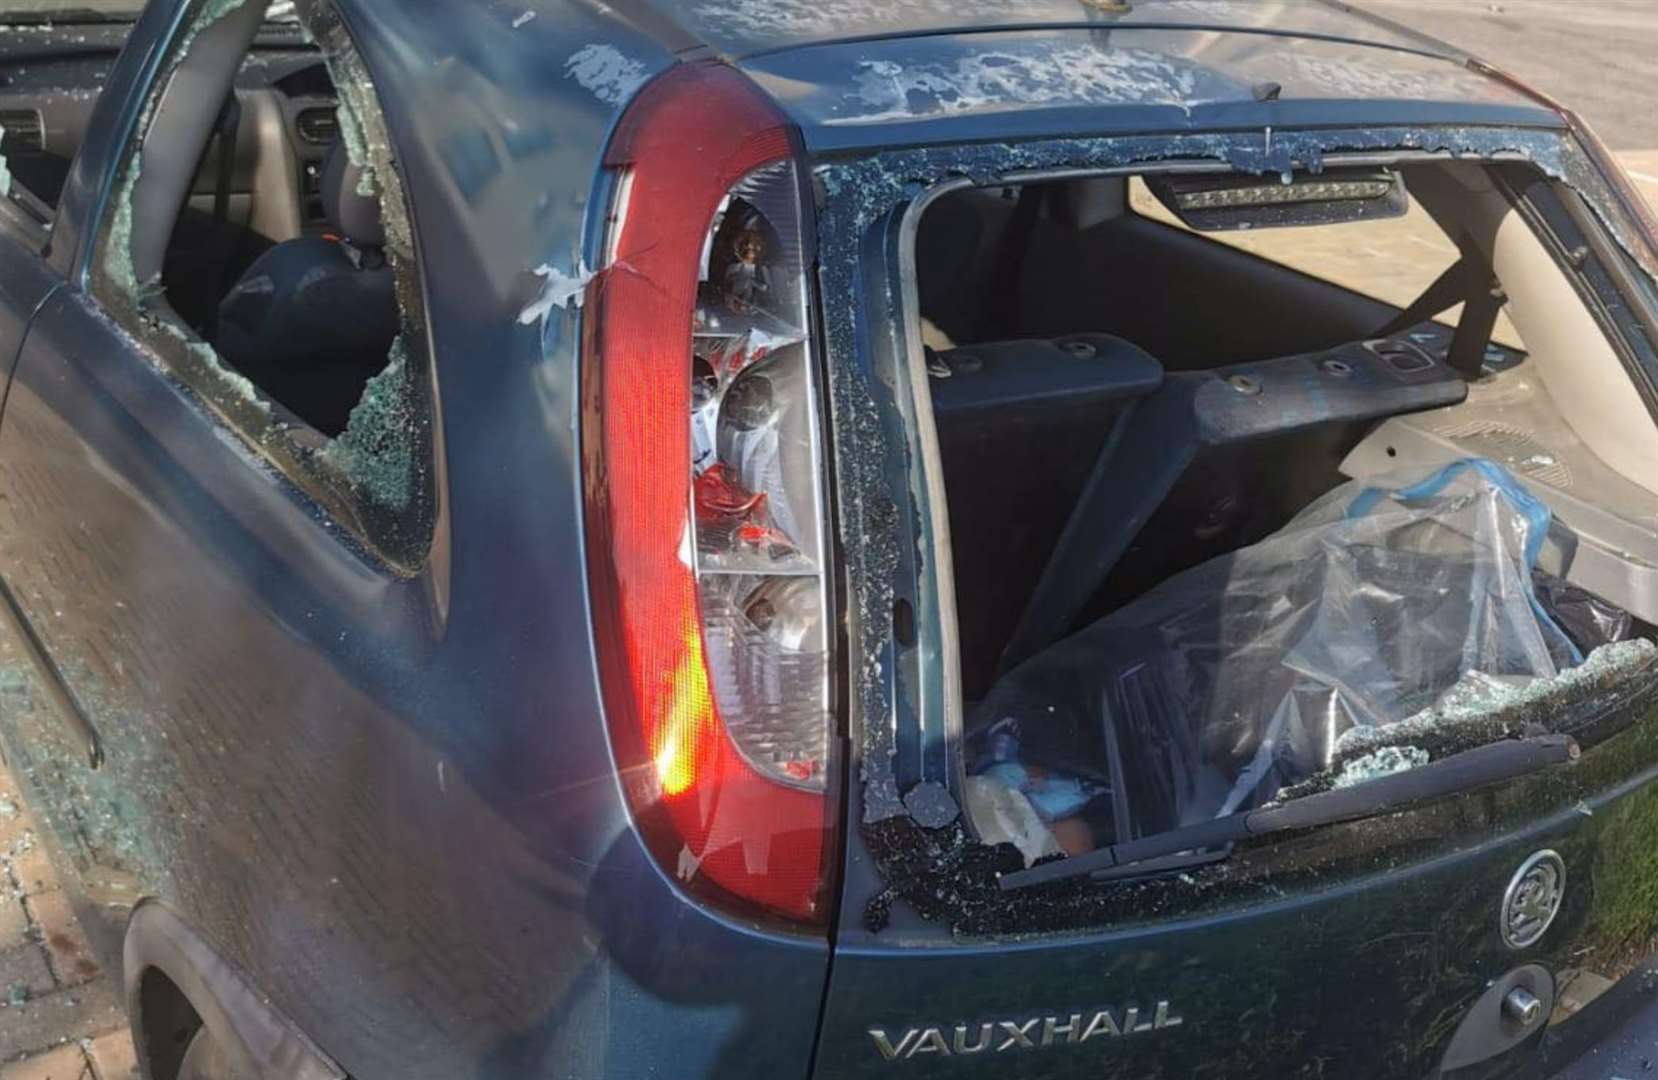 The car was badly damaged in the attack (49466302)